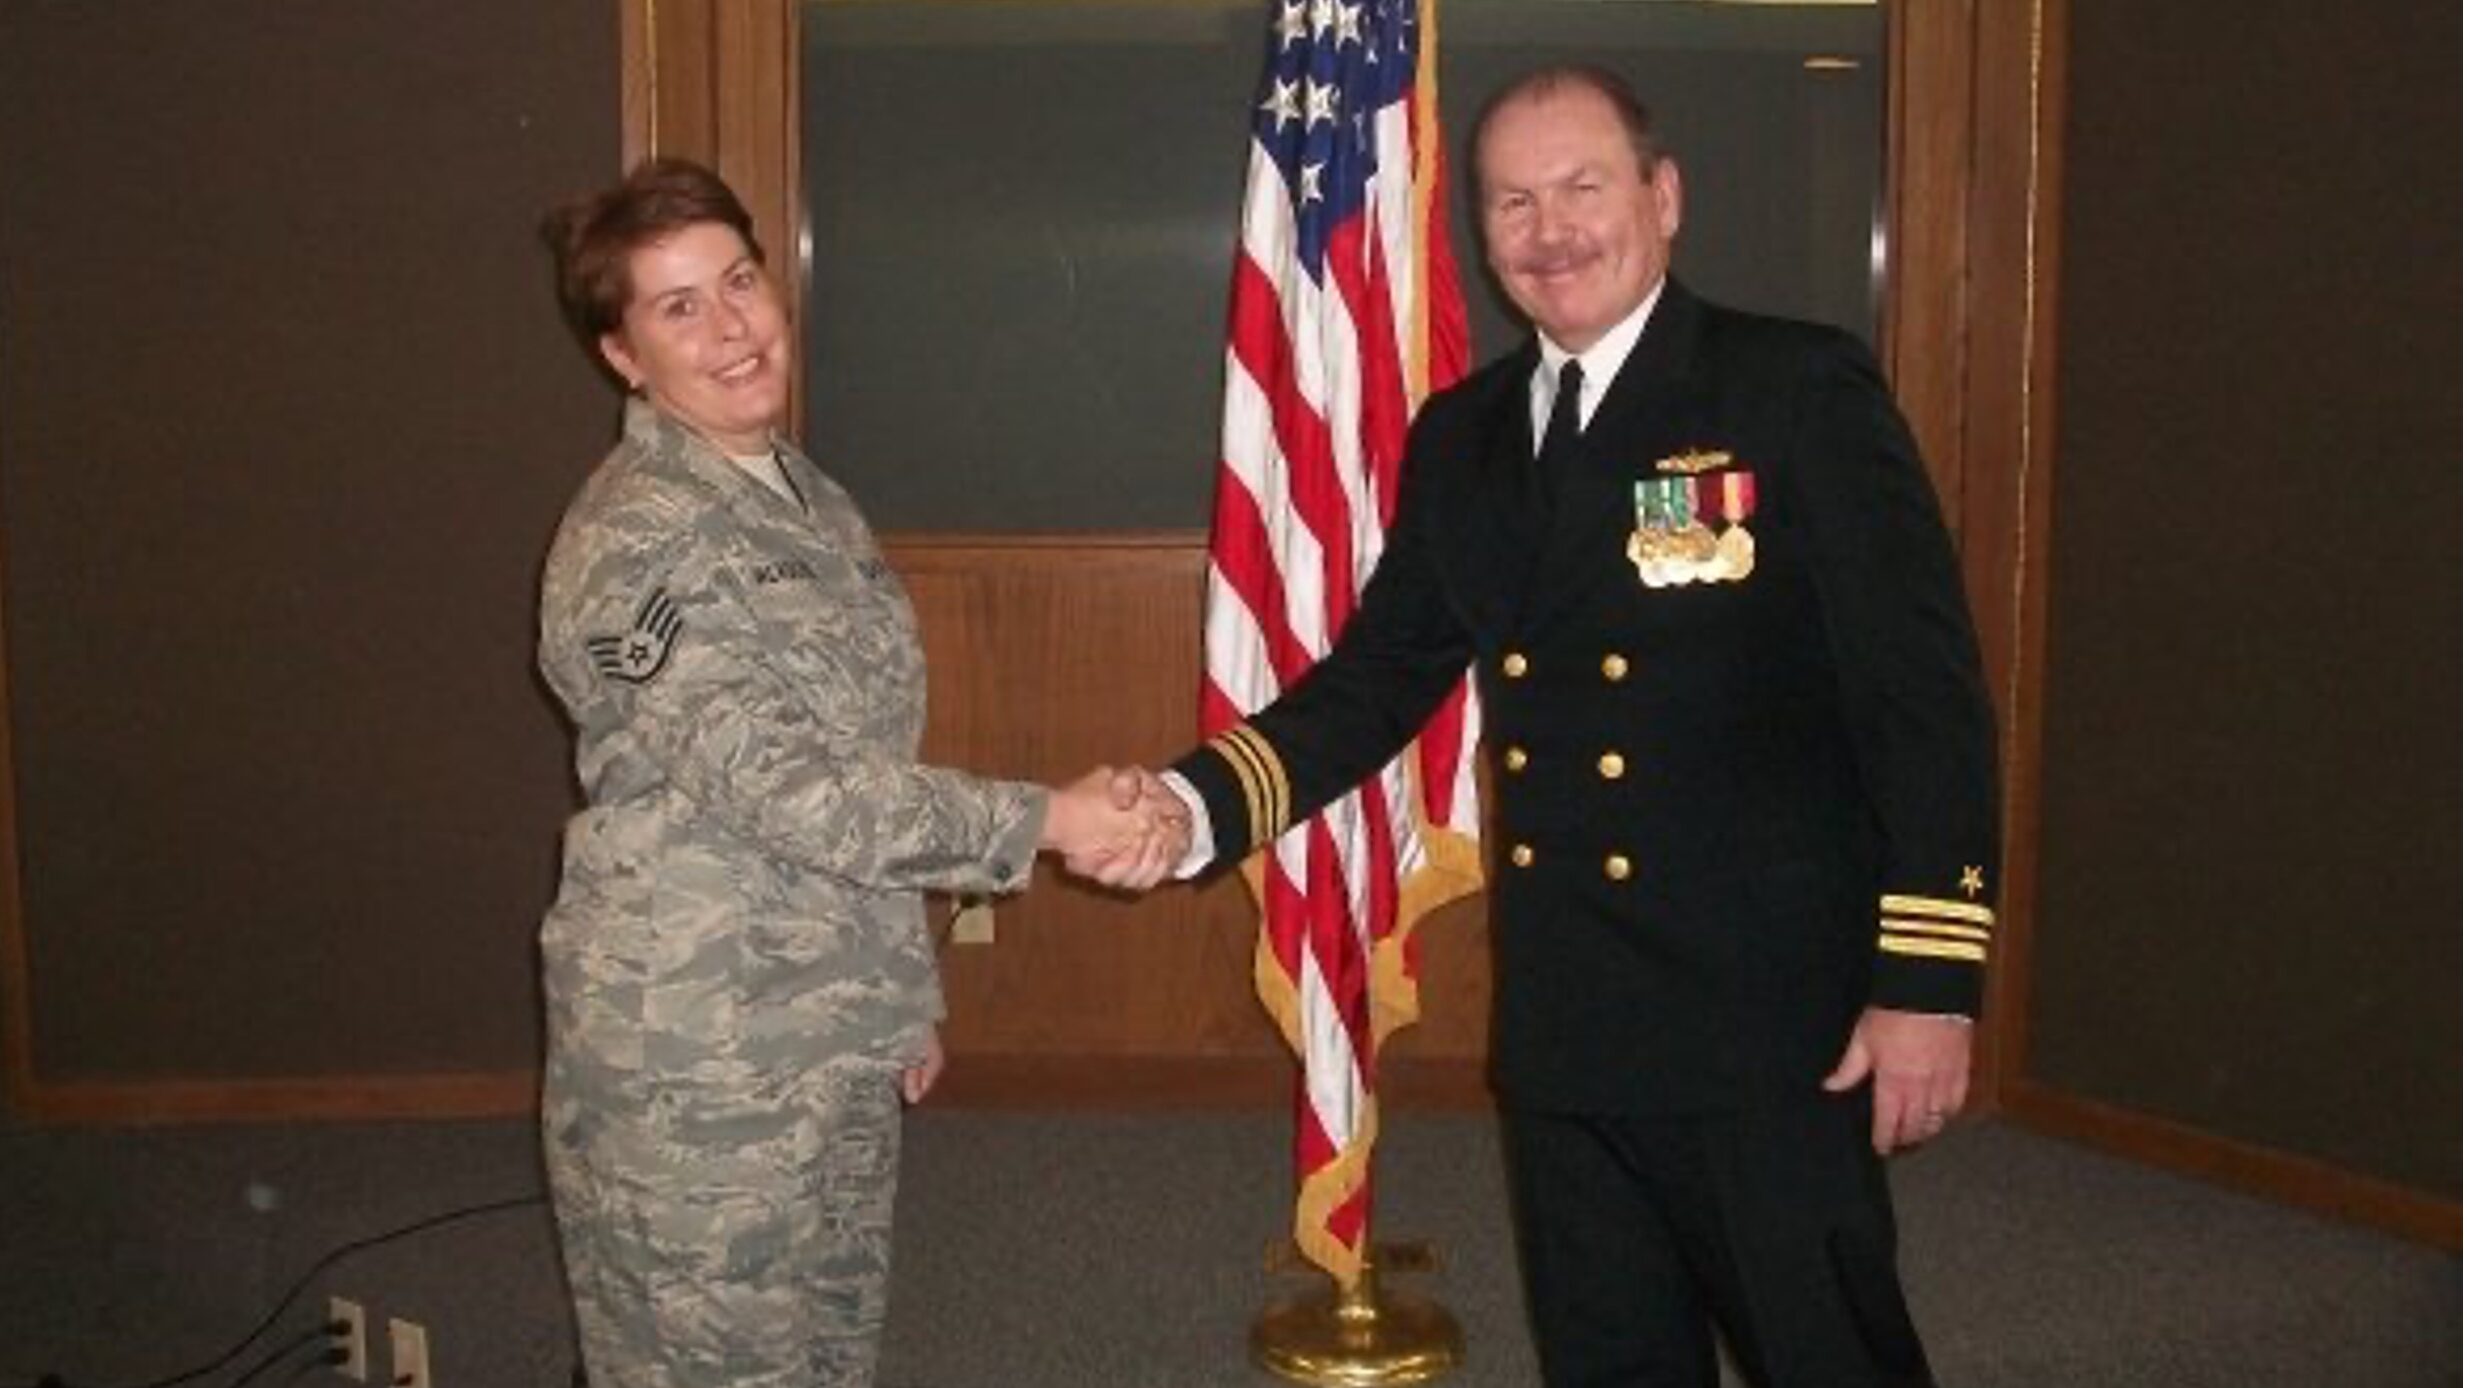 Wlaschin re-enlisting his spouse Pam in the US Air Force Reserve just before he retired from active duty.